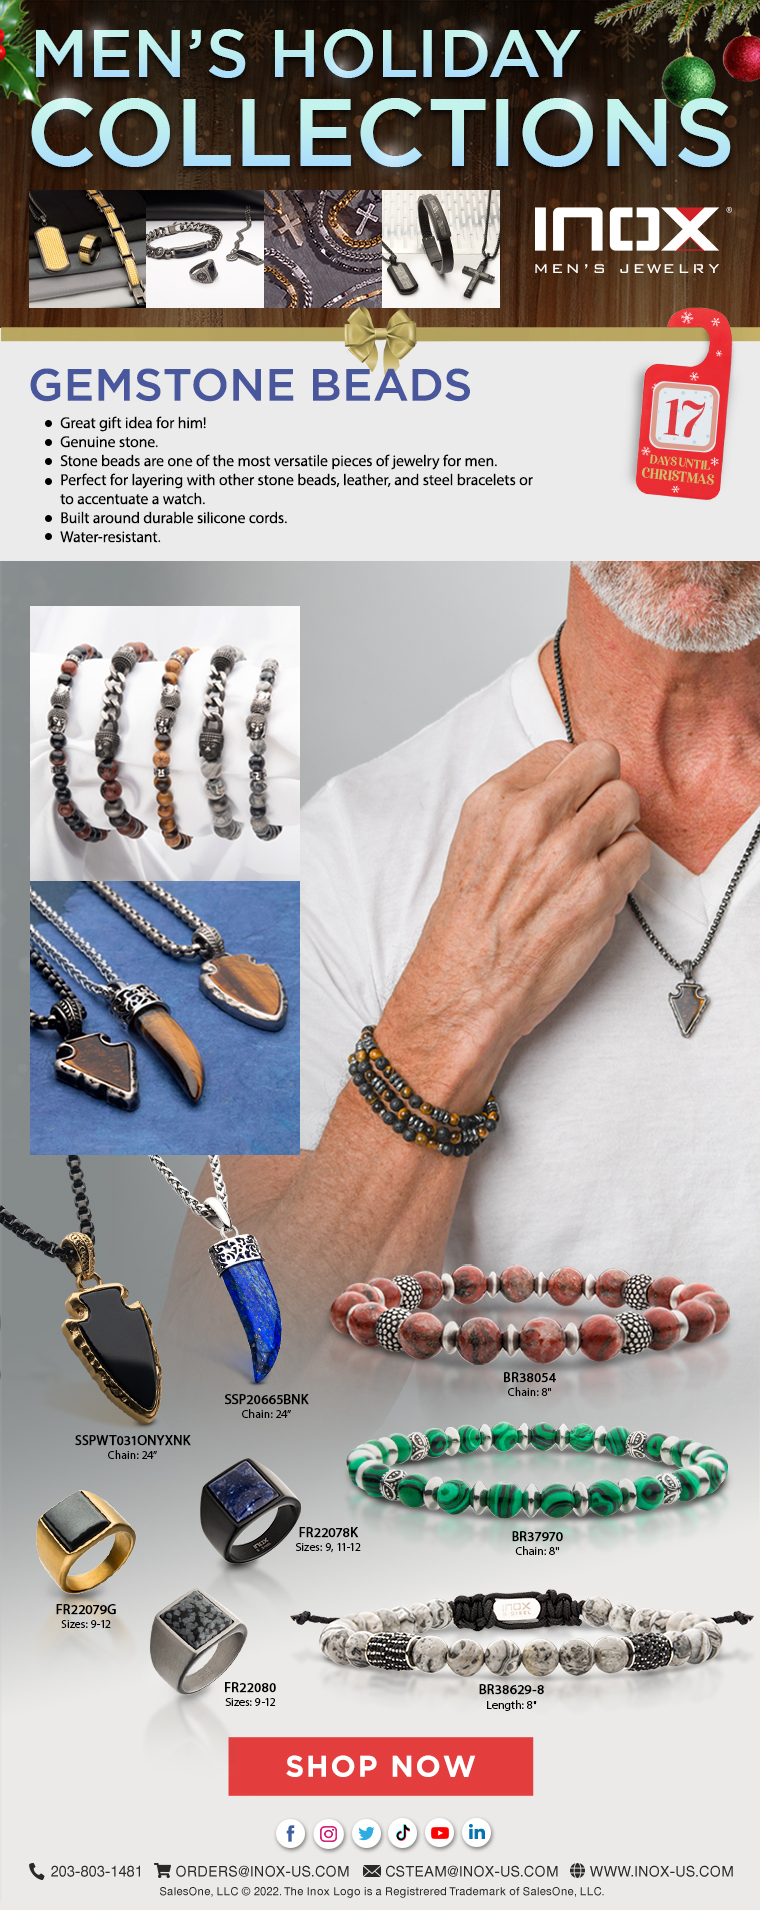 Gemstone Beads Jewelry - Men's Holiday Collection from INOX